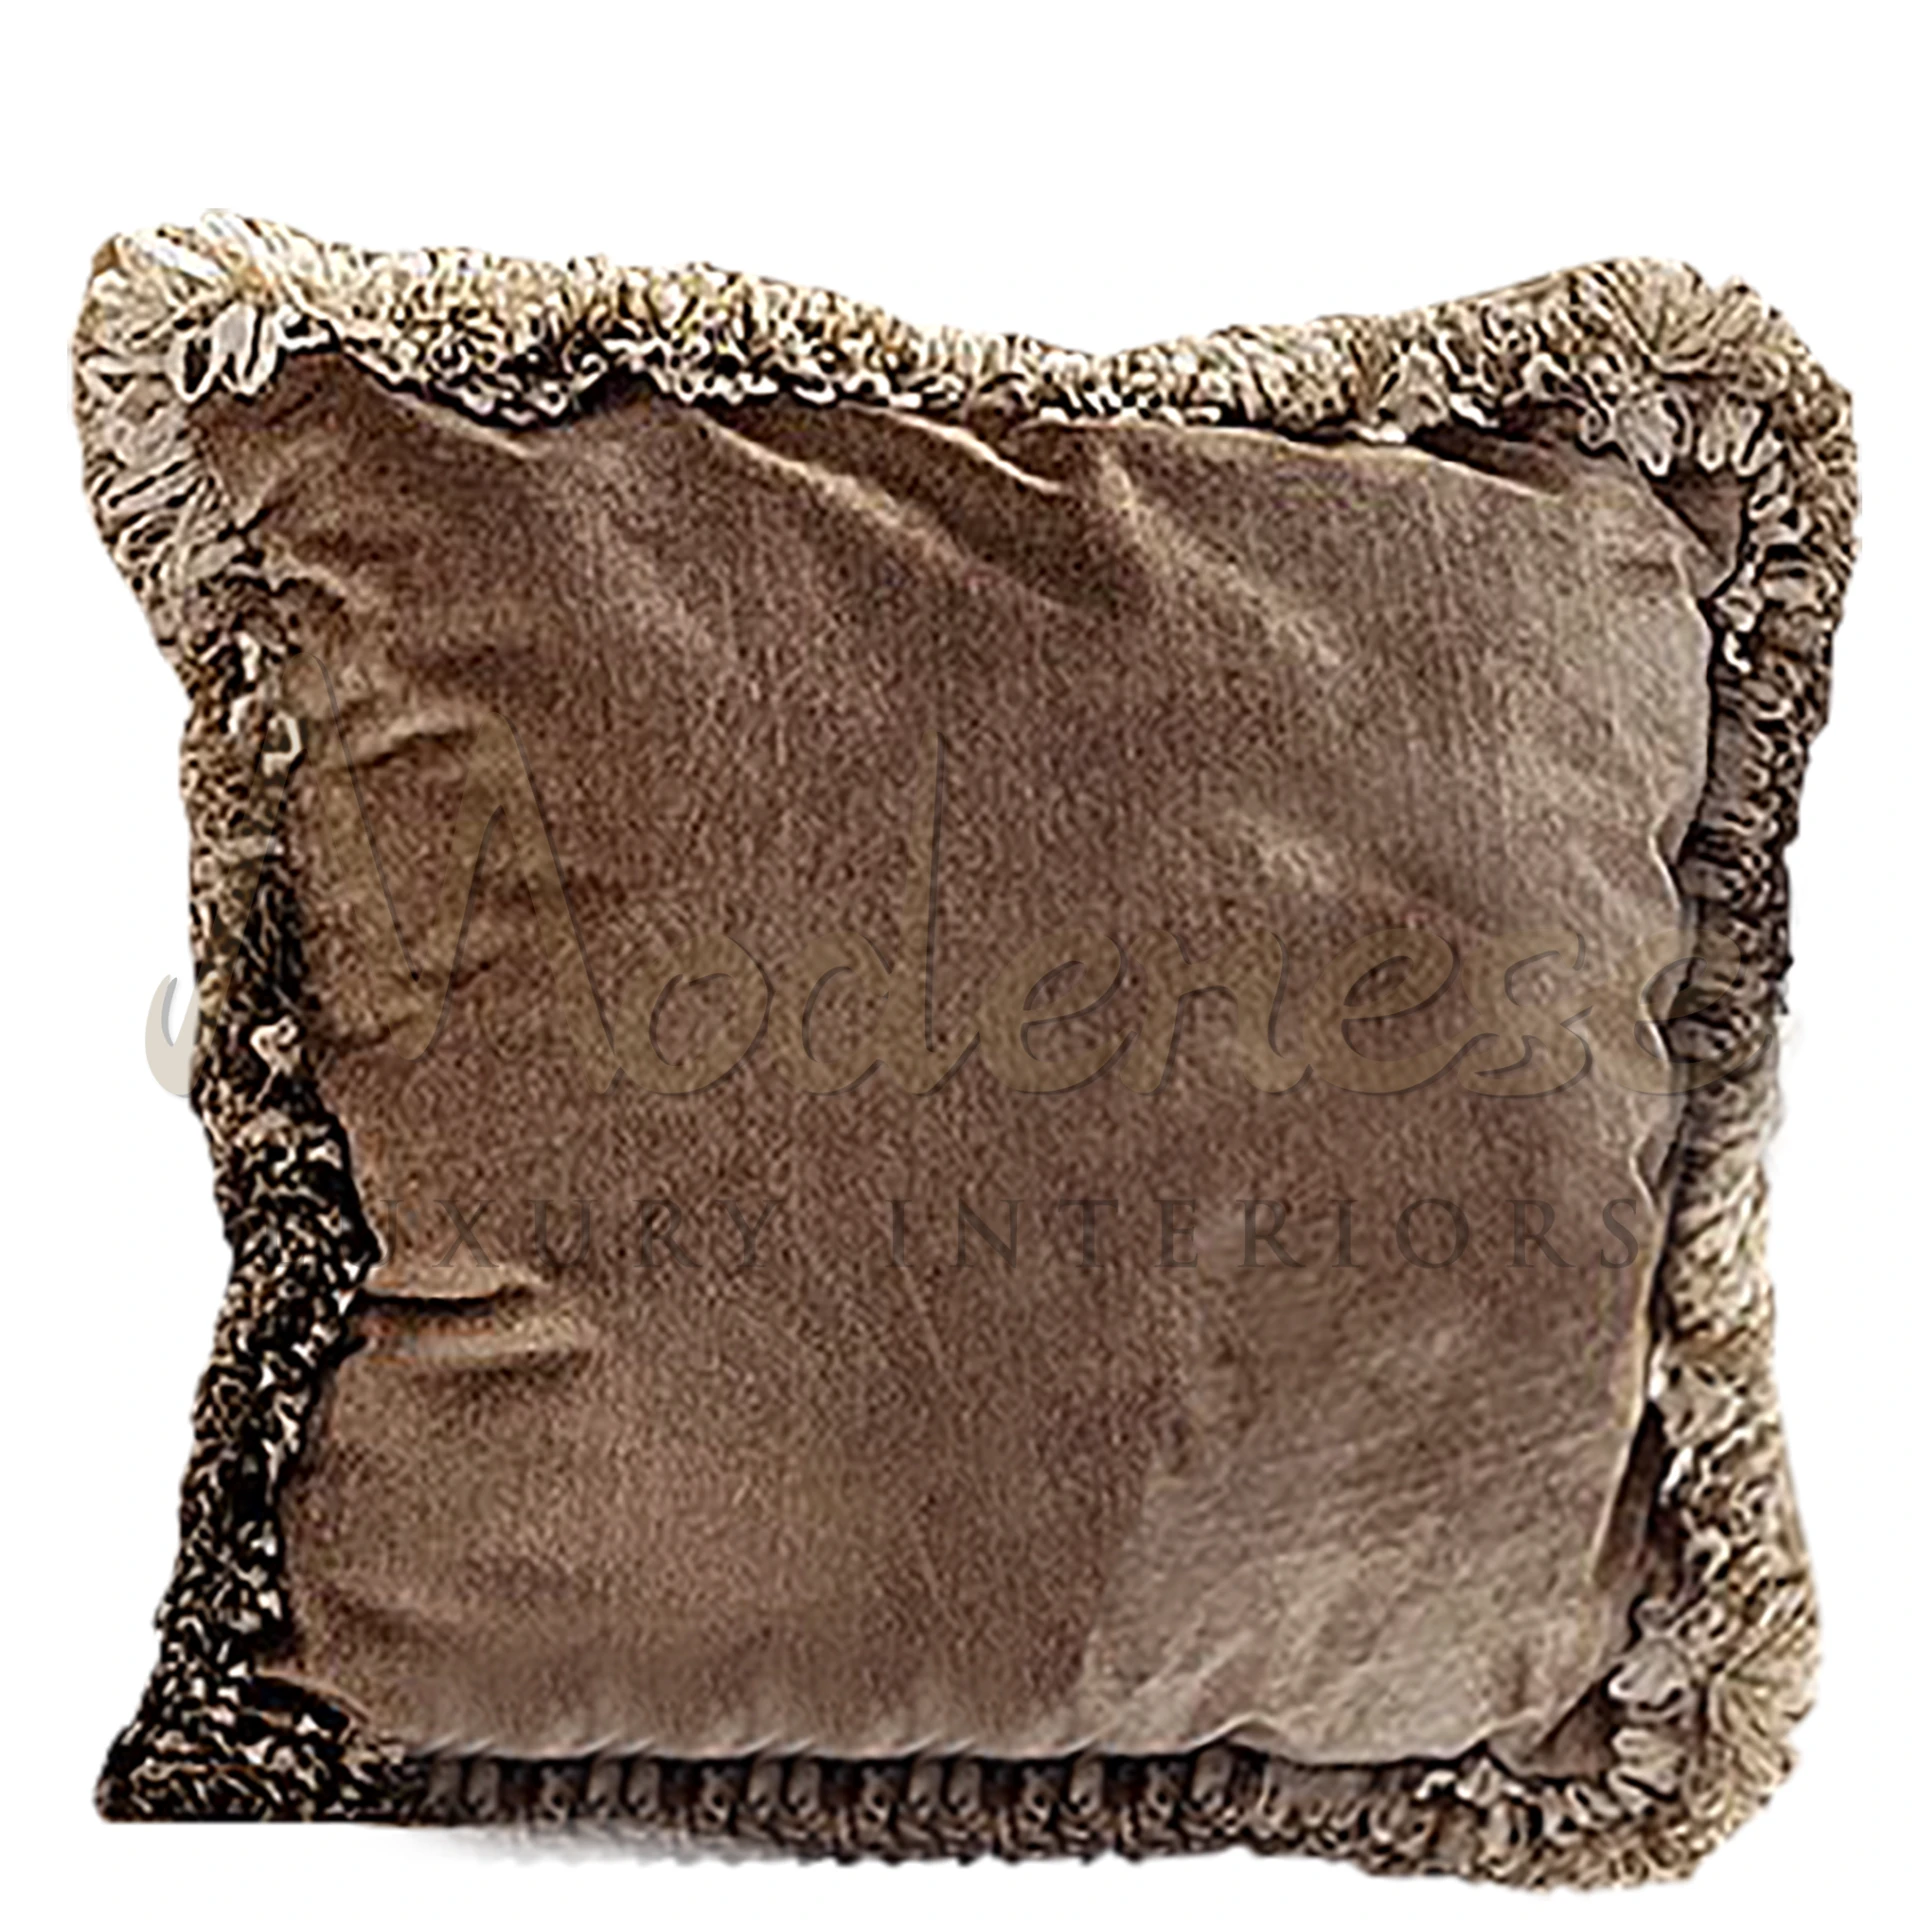 Classical Brown Pillow with clean lines and refined proportions, showcasing Italian luxury and traditional aesthetics.